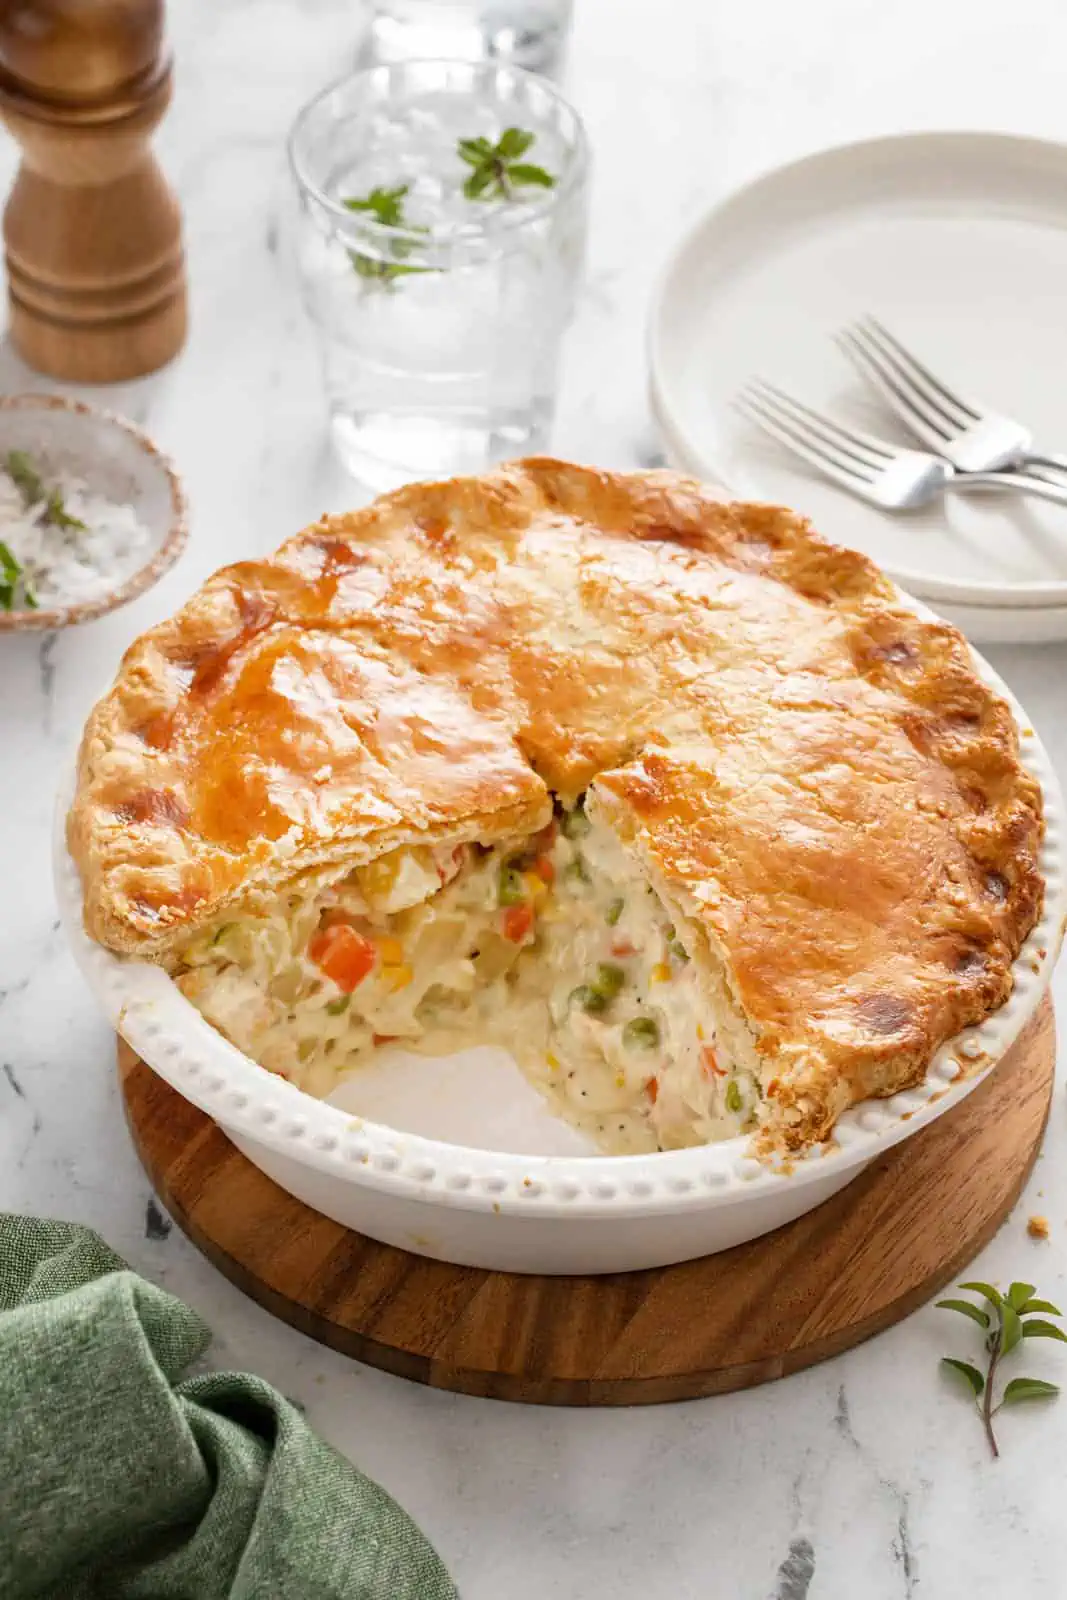 Homemade chicken pot pie with two slices taken from the pie plate.